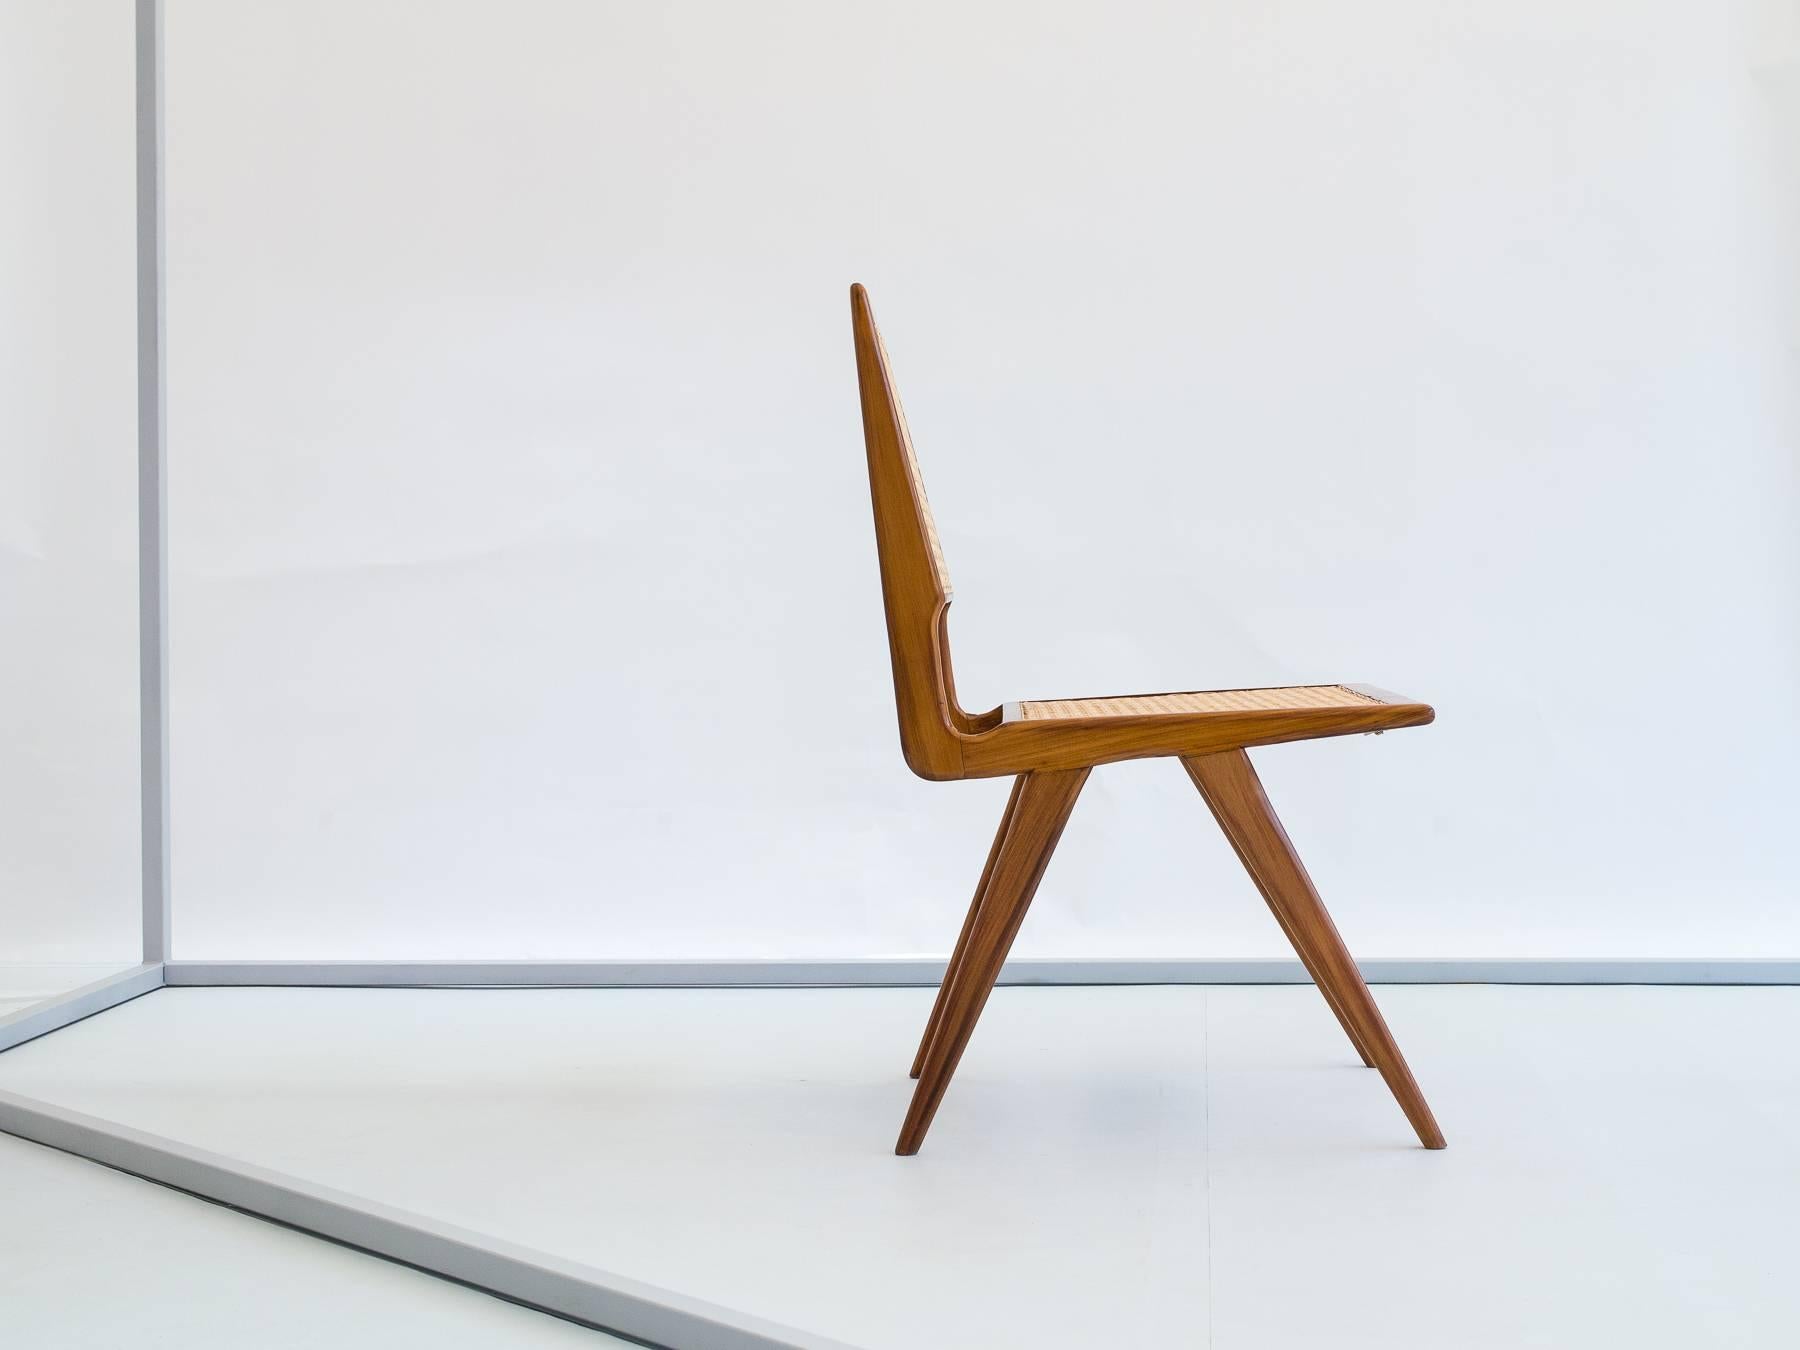 Beautiful chair produced in Brazil by Forma S/A, circa 1956. This rare version has a caned seat and back, while the more common versions have a padded seat. Shows remains of the factory paper stamp inside the front stretcher.